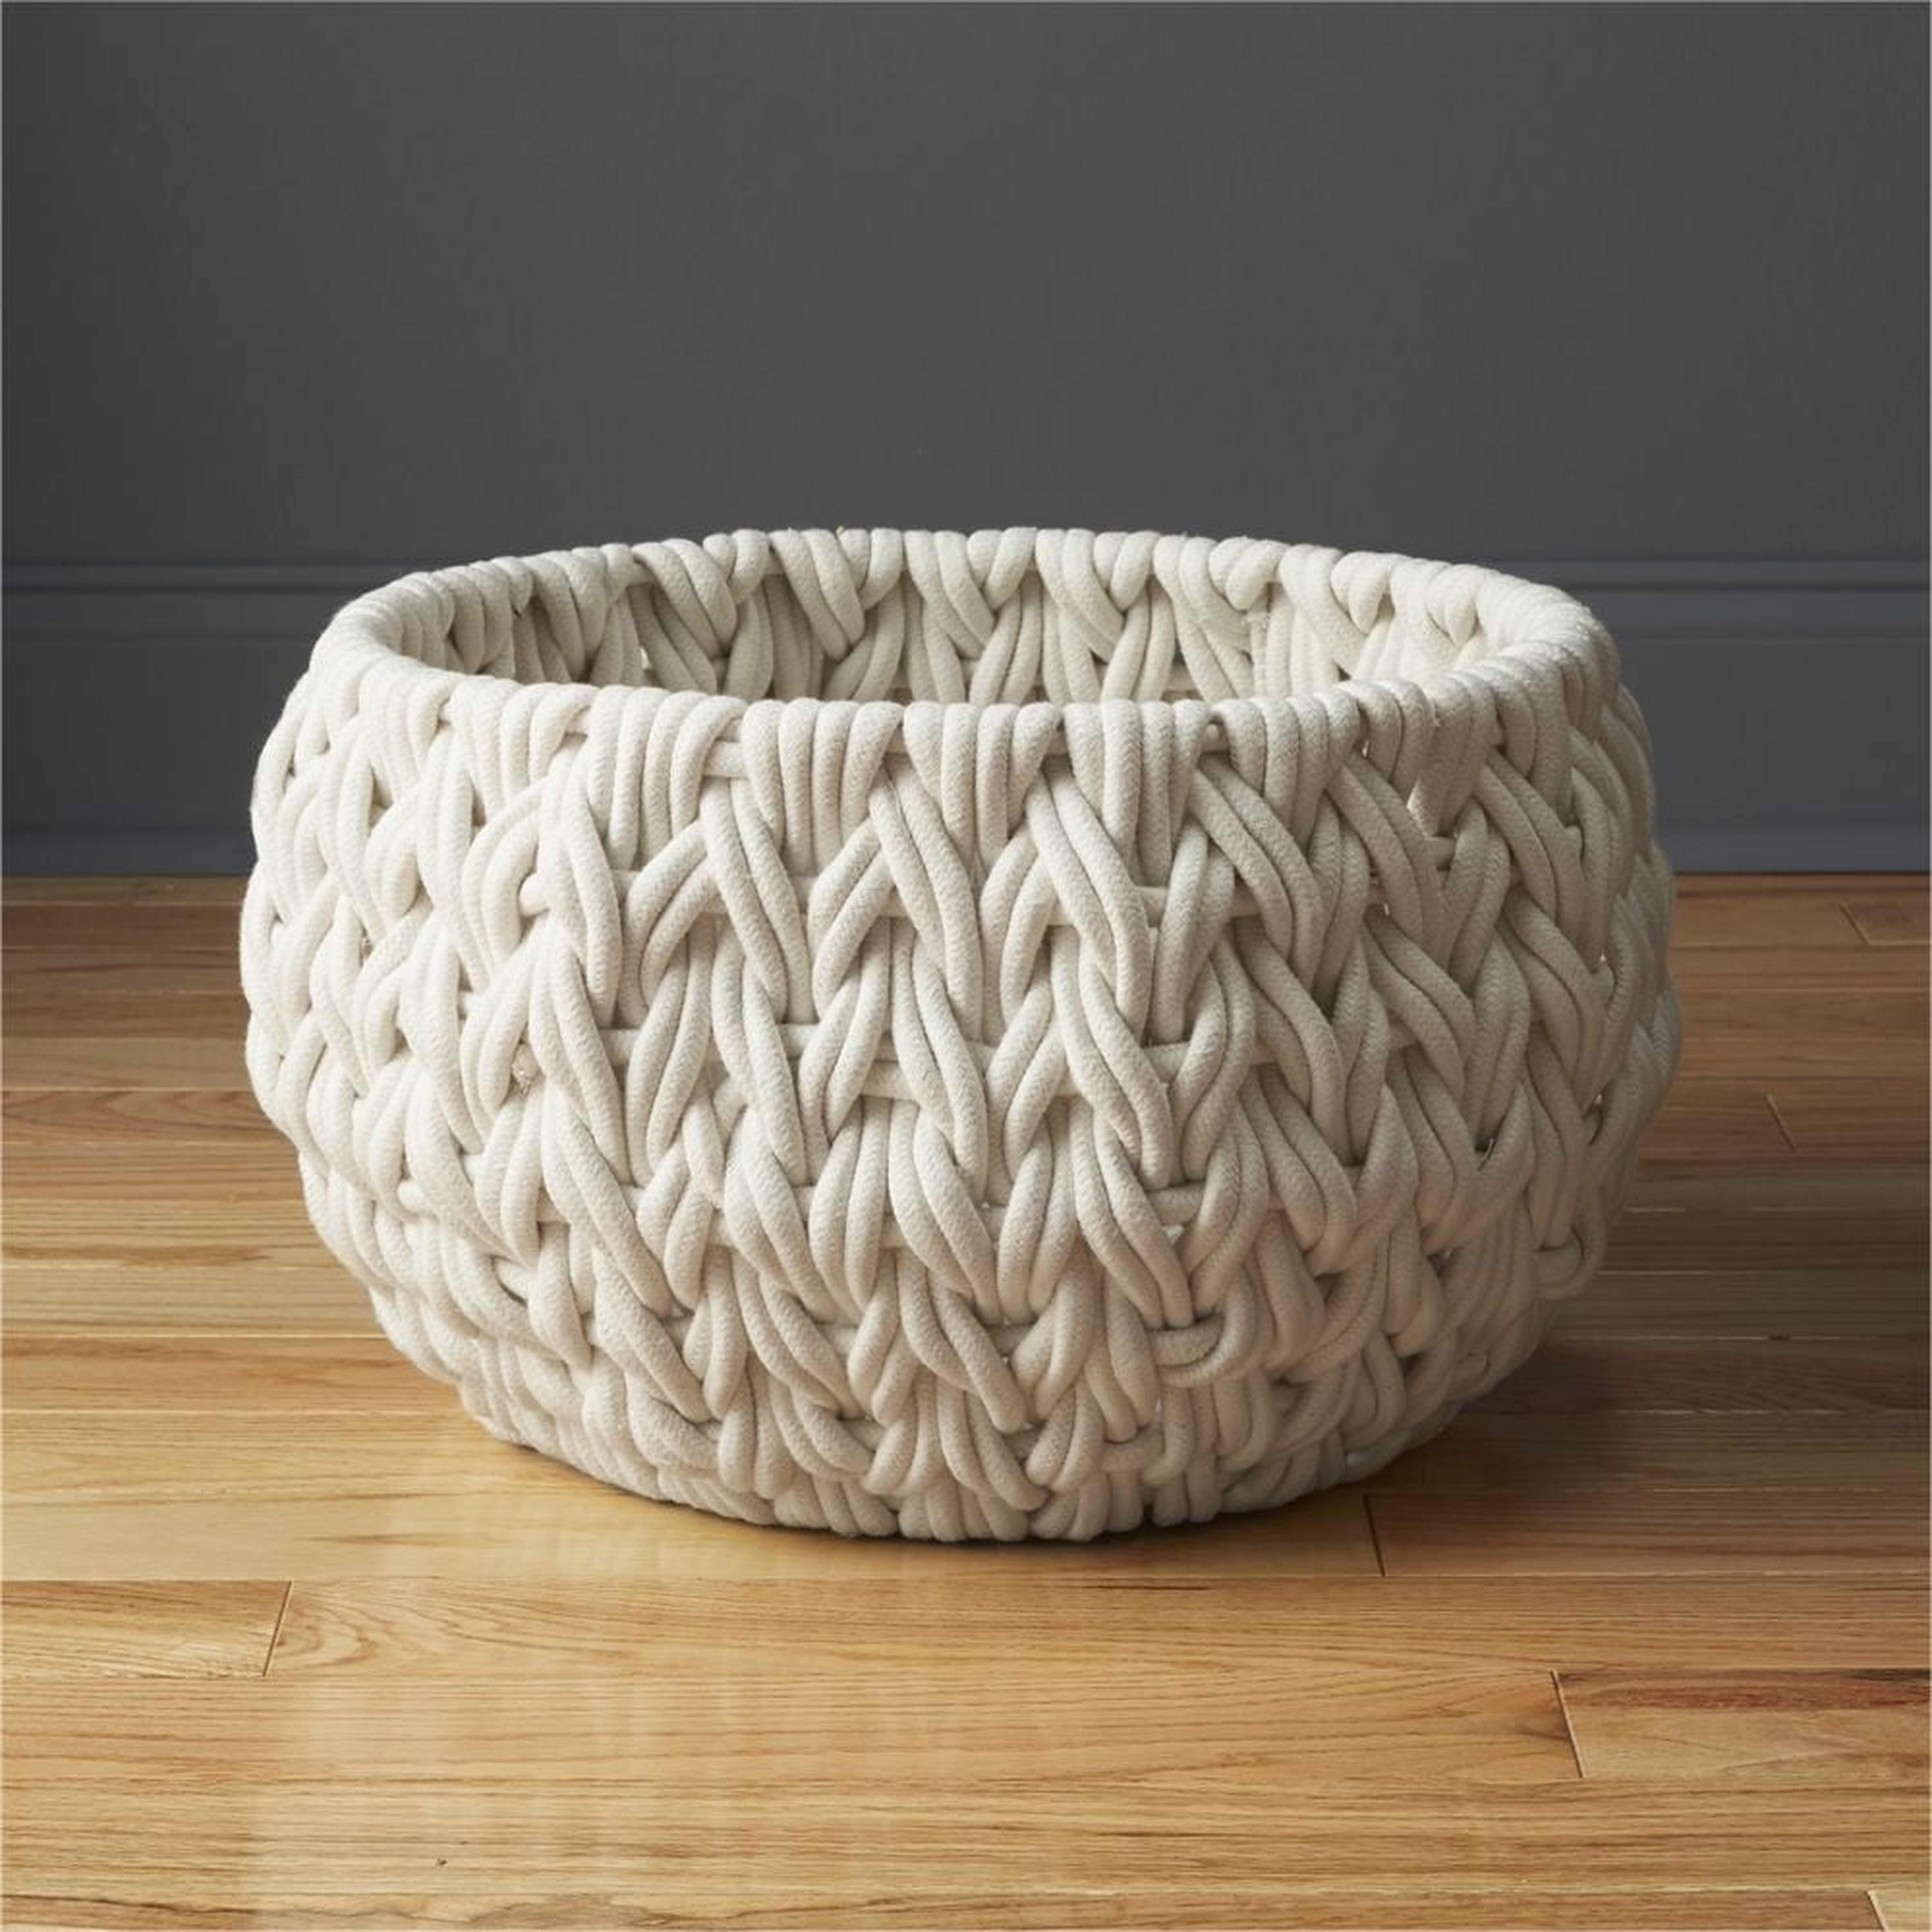 conway small basket - CB2